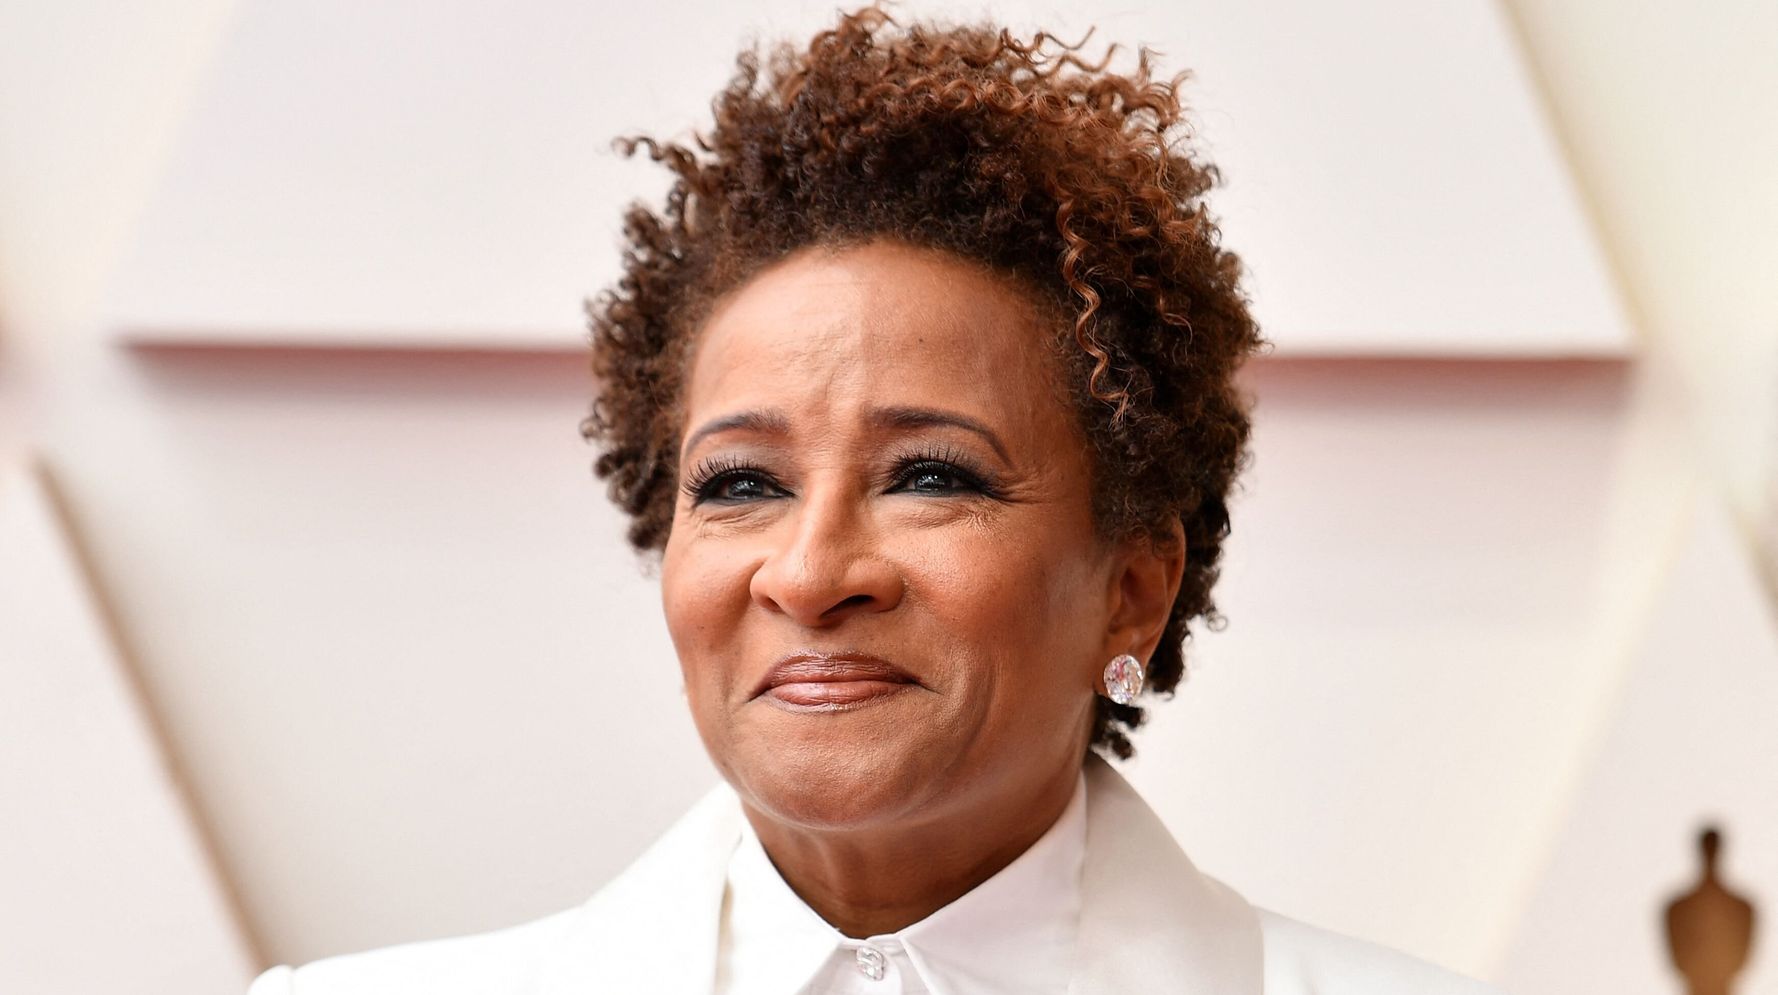 Wanda Sykes Reveals What Chris Rock Said To Her After 'Sickening' Oscars Incident